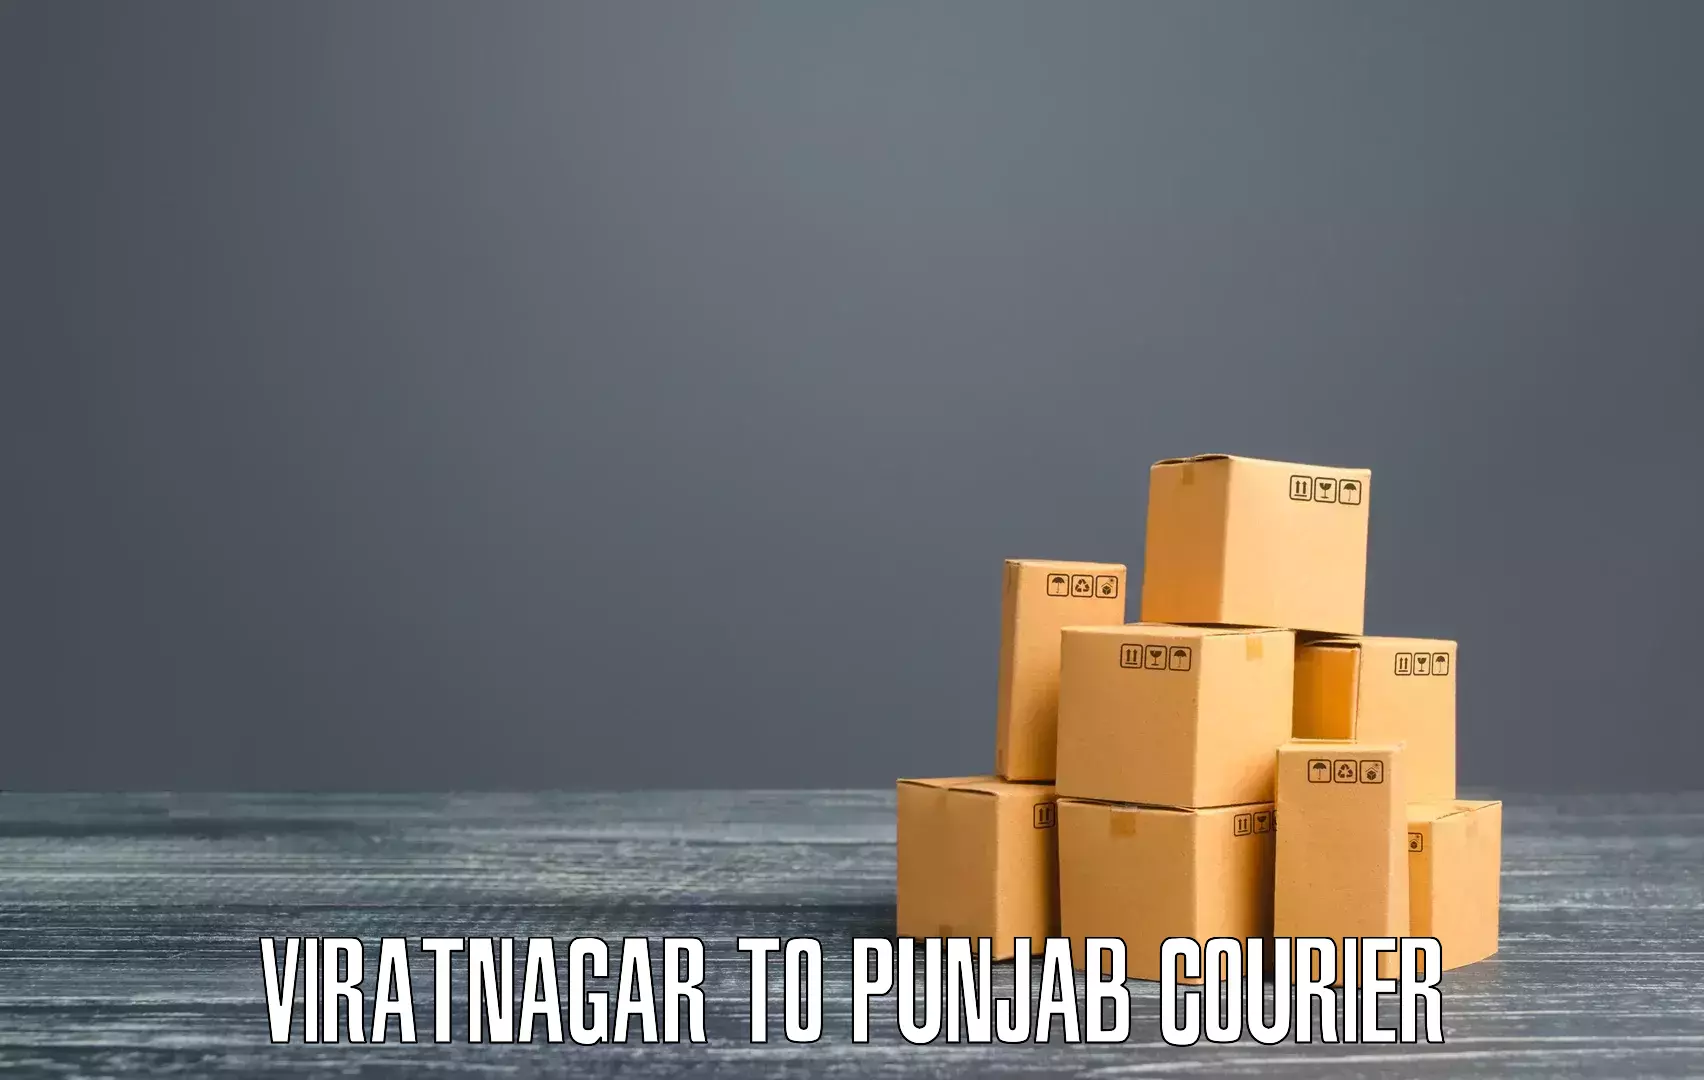 Sustainable delivery practices in Viratnagar to Talwara